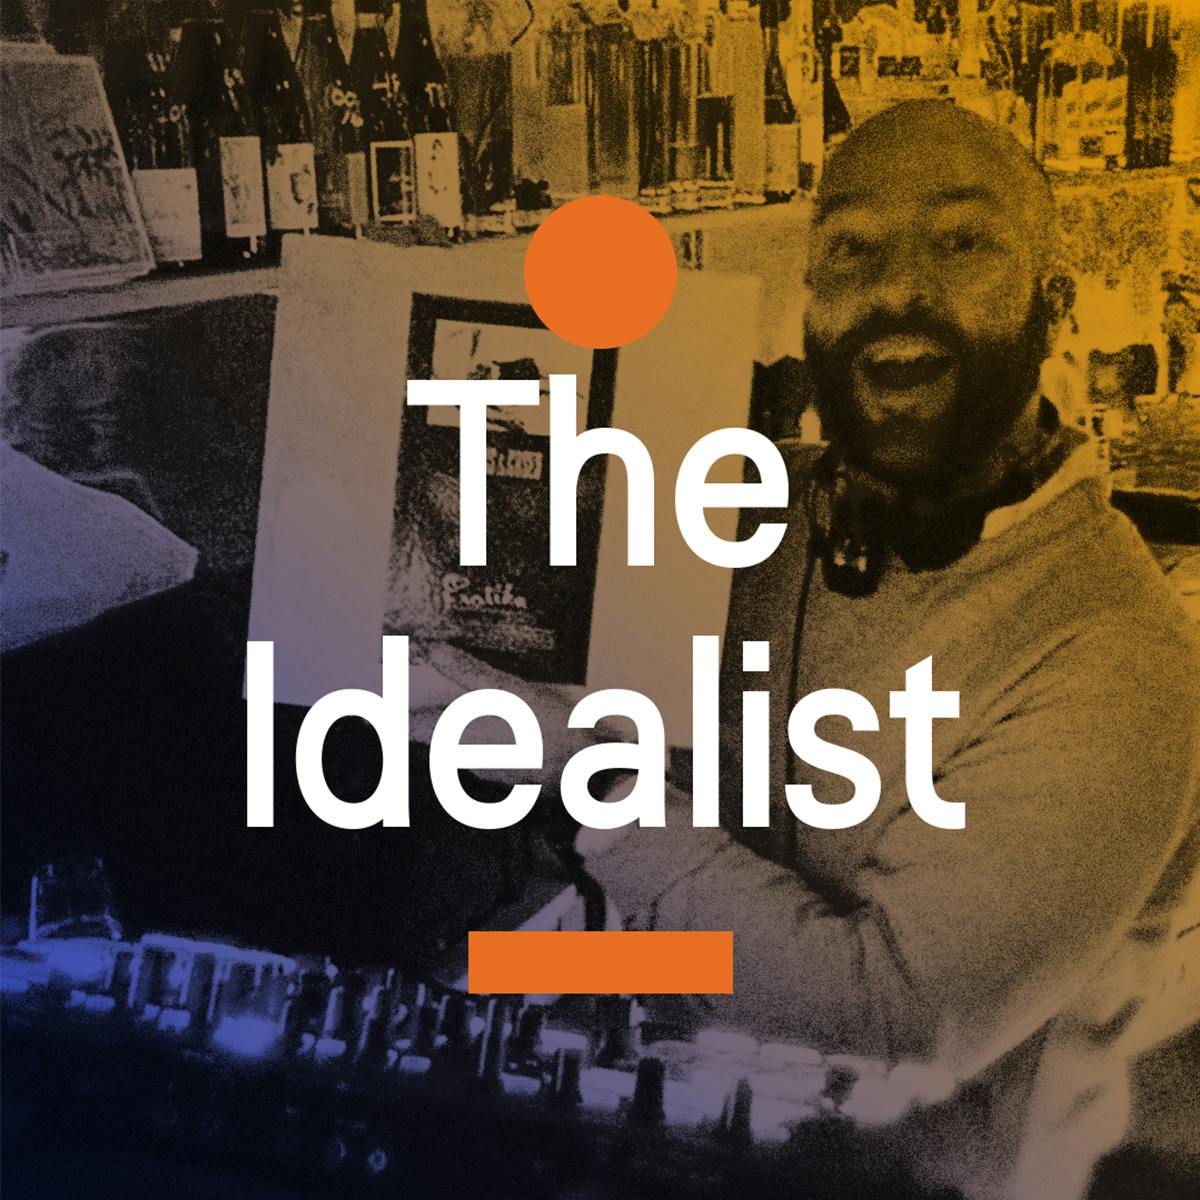 Curated By – The Idealist